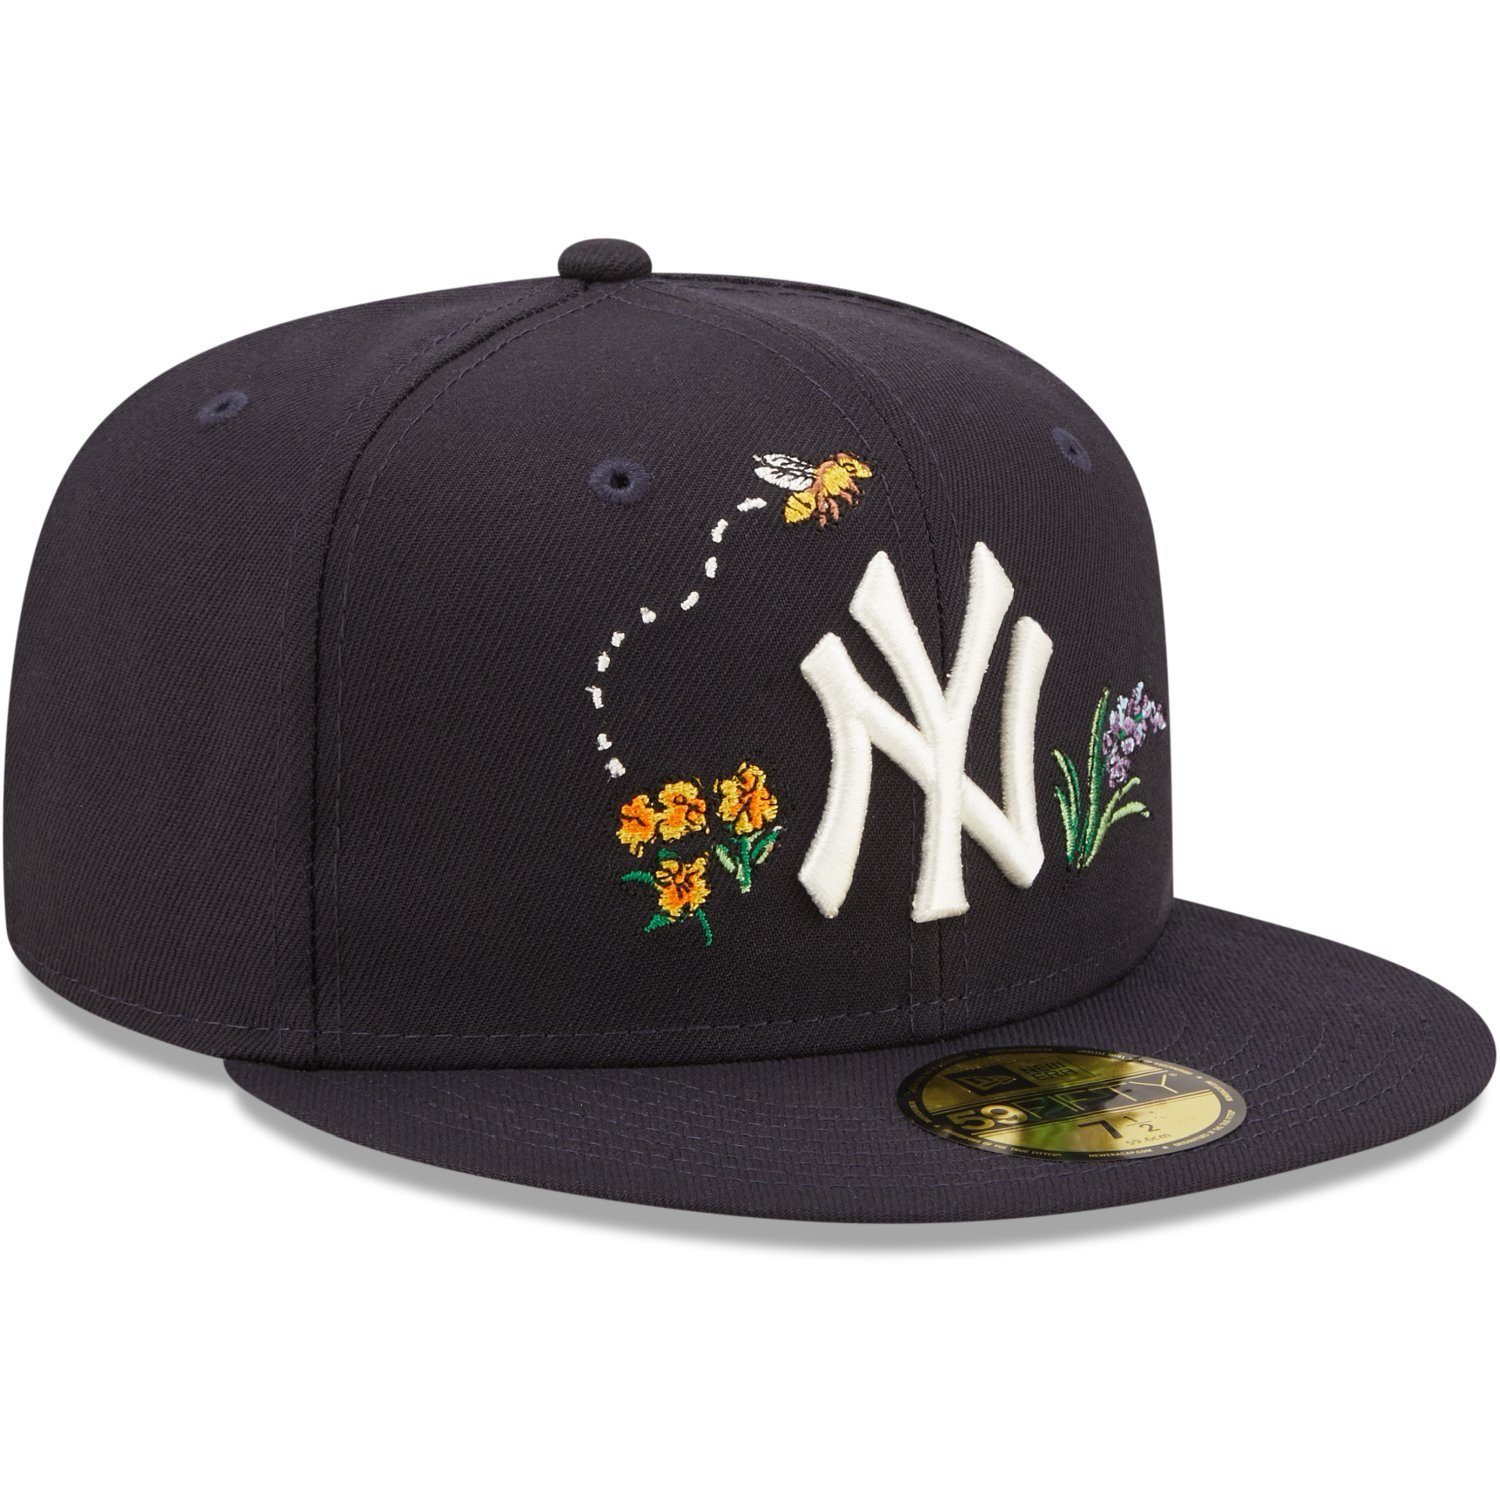 New Era Fitted Cap FLORAL York New WATER 59Fifty Yankees